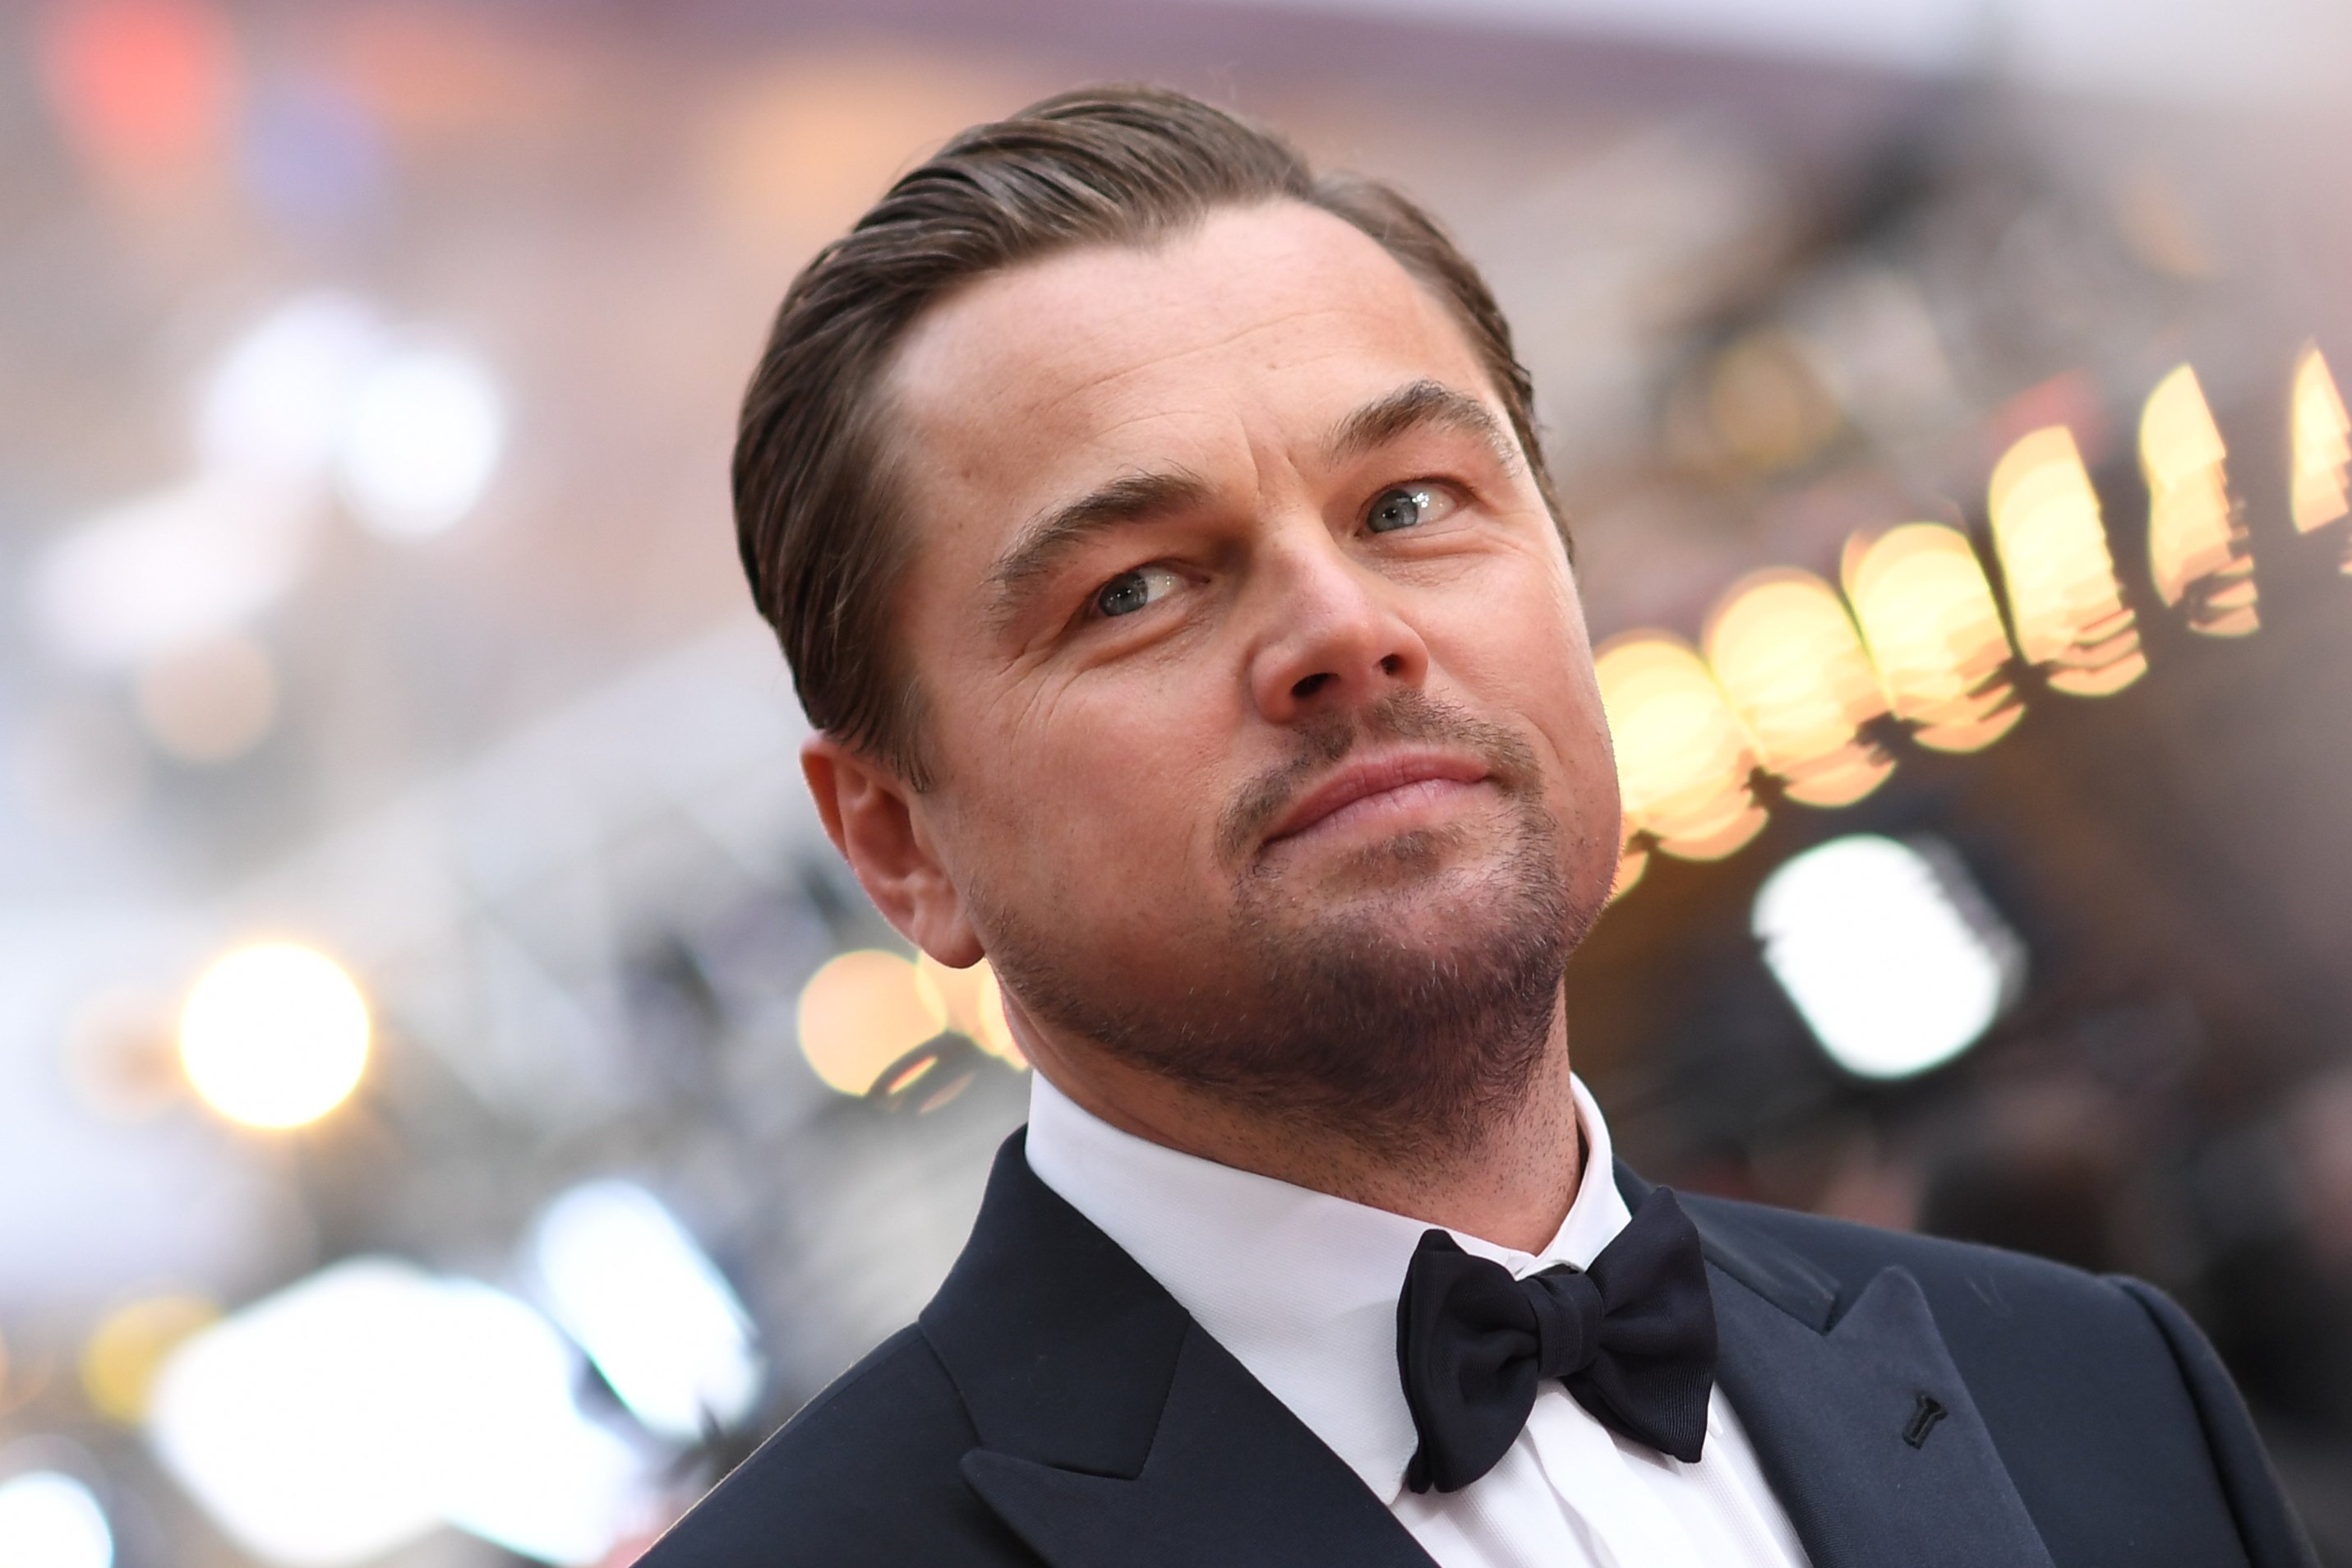 Actor Leonardio DiCaprio at the 92nd Oscars - he happens to be a fan of 'Jersey Shore'